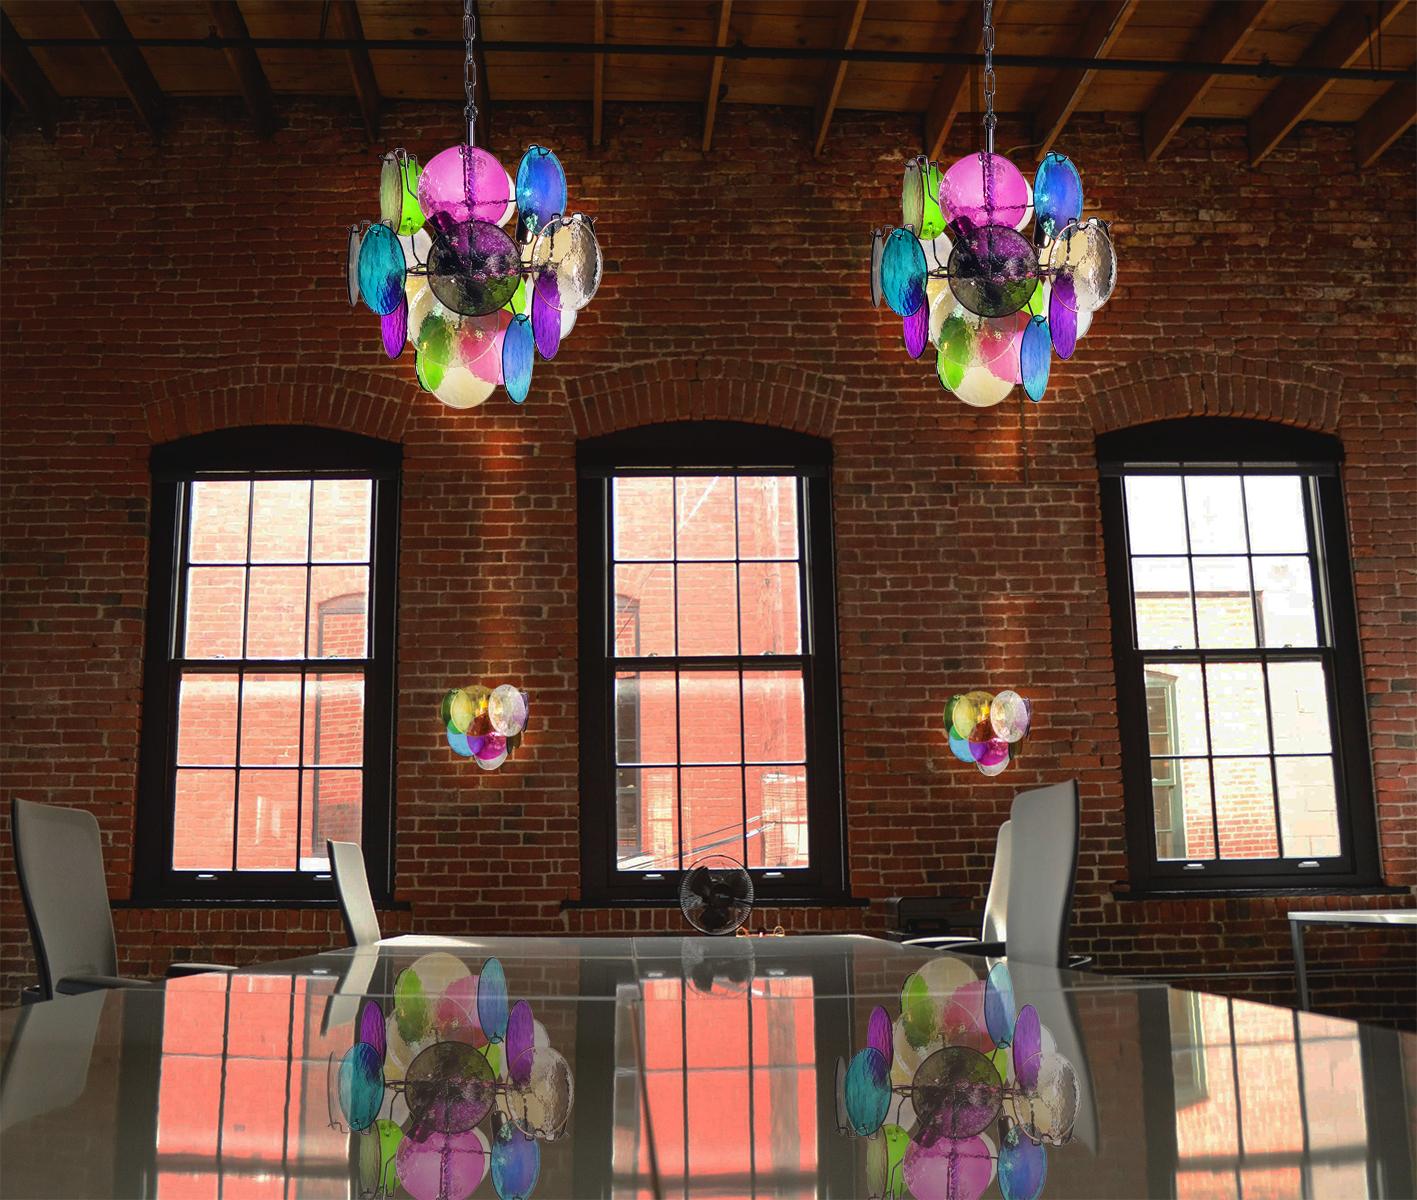 Pair of vintage Italian Murano chandeliers in Vistosi style. The chandelier has 24 fantastic Murano multicolored disks in a metal frame.
Period: 1980s
Dimensions: 41.30 inches (105 cm) height with chain; 20.50 inches (52 cm) height without chain;